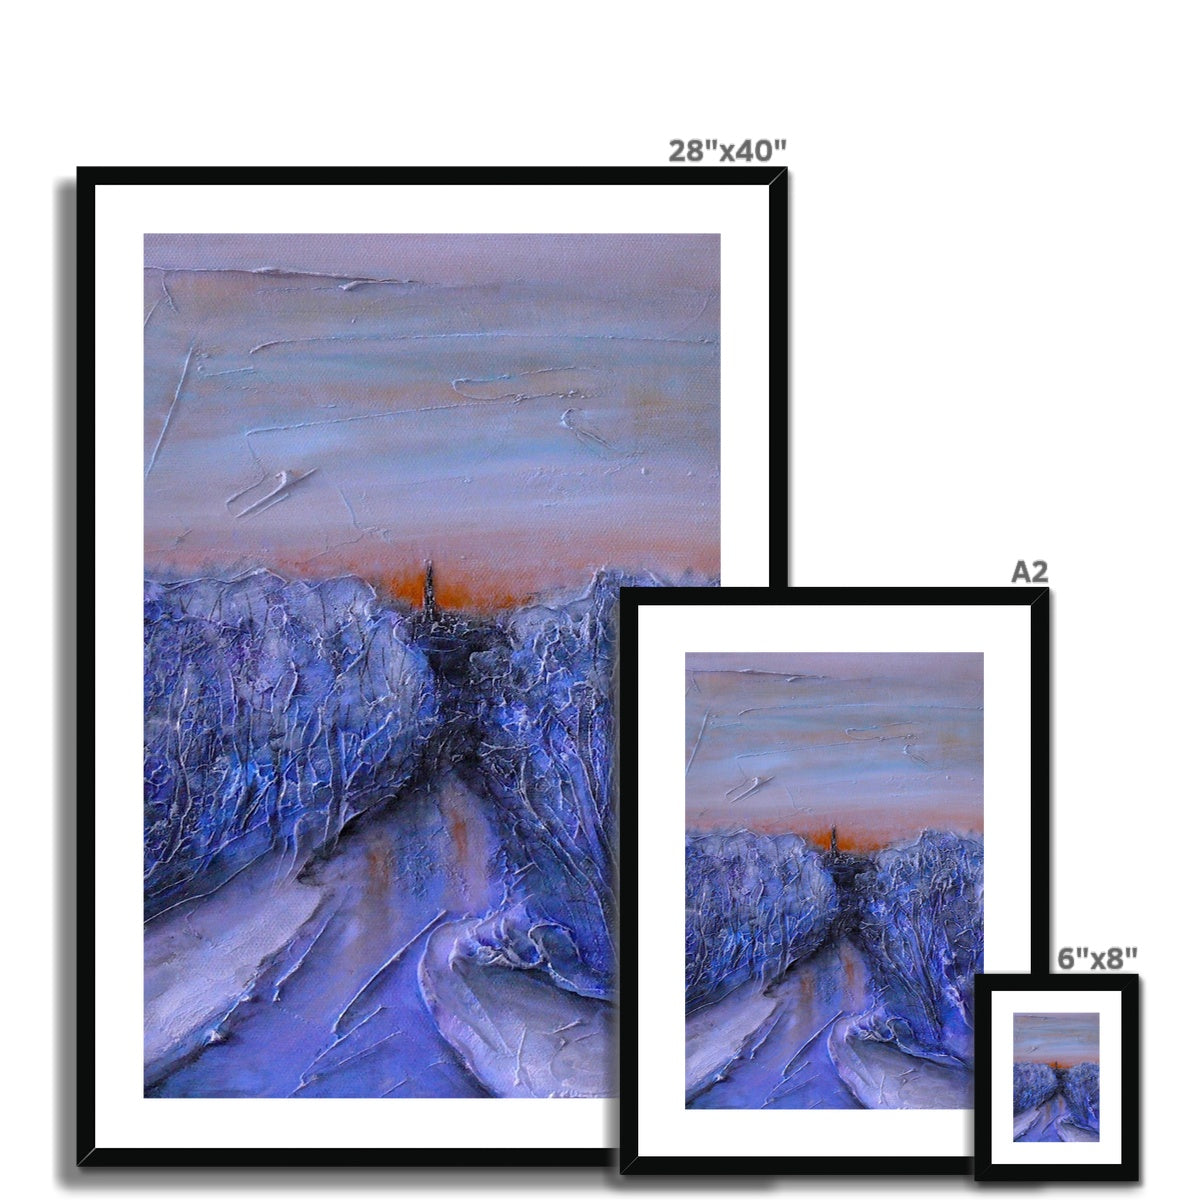 A Frozen River Kelvin Painting | Framed & Mounted Prints From Scotland-Framed & Mounted Prints-Edinburgh & Glasgow Art Gallery-Paintings, Prints, Homeware, Art Gifts From Scotland By Scottish Artist Kevin Hunter